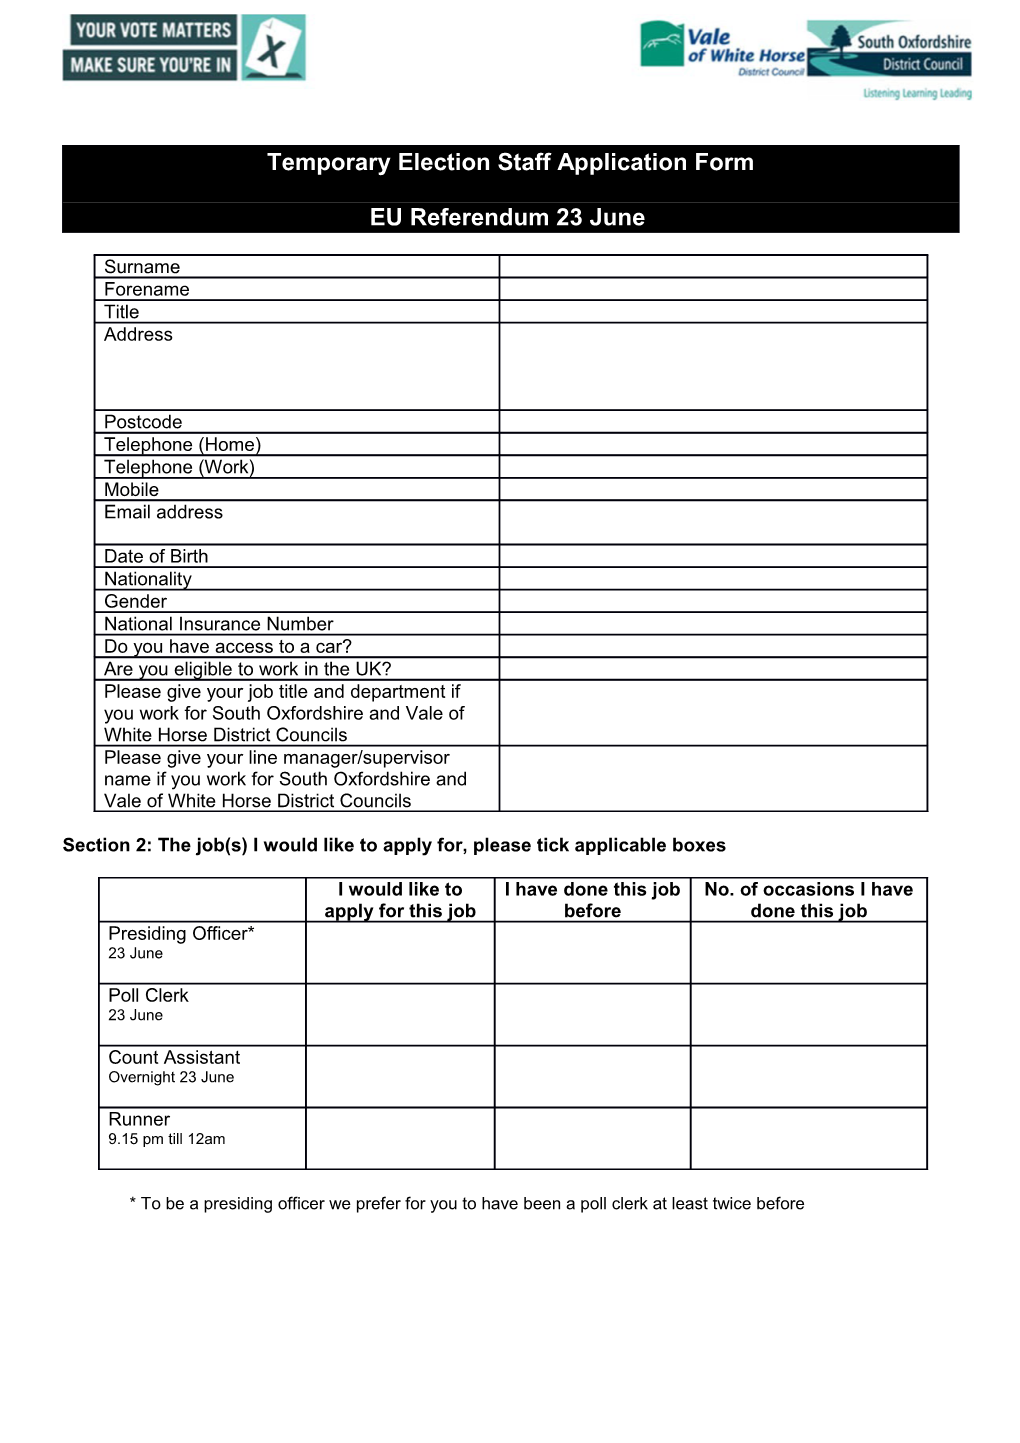 Temporary Election Staff Application Form